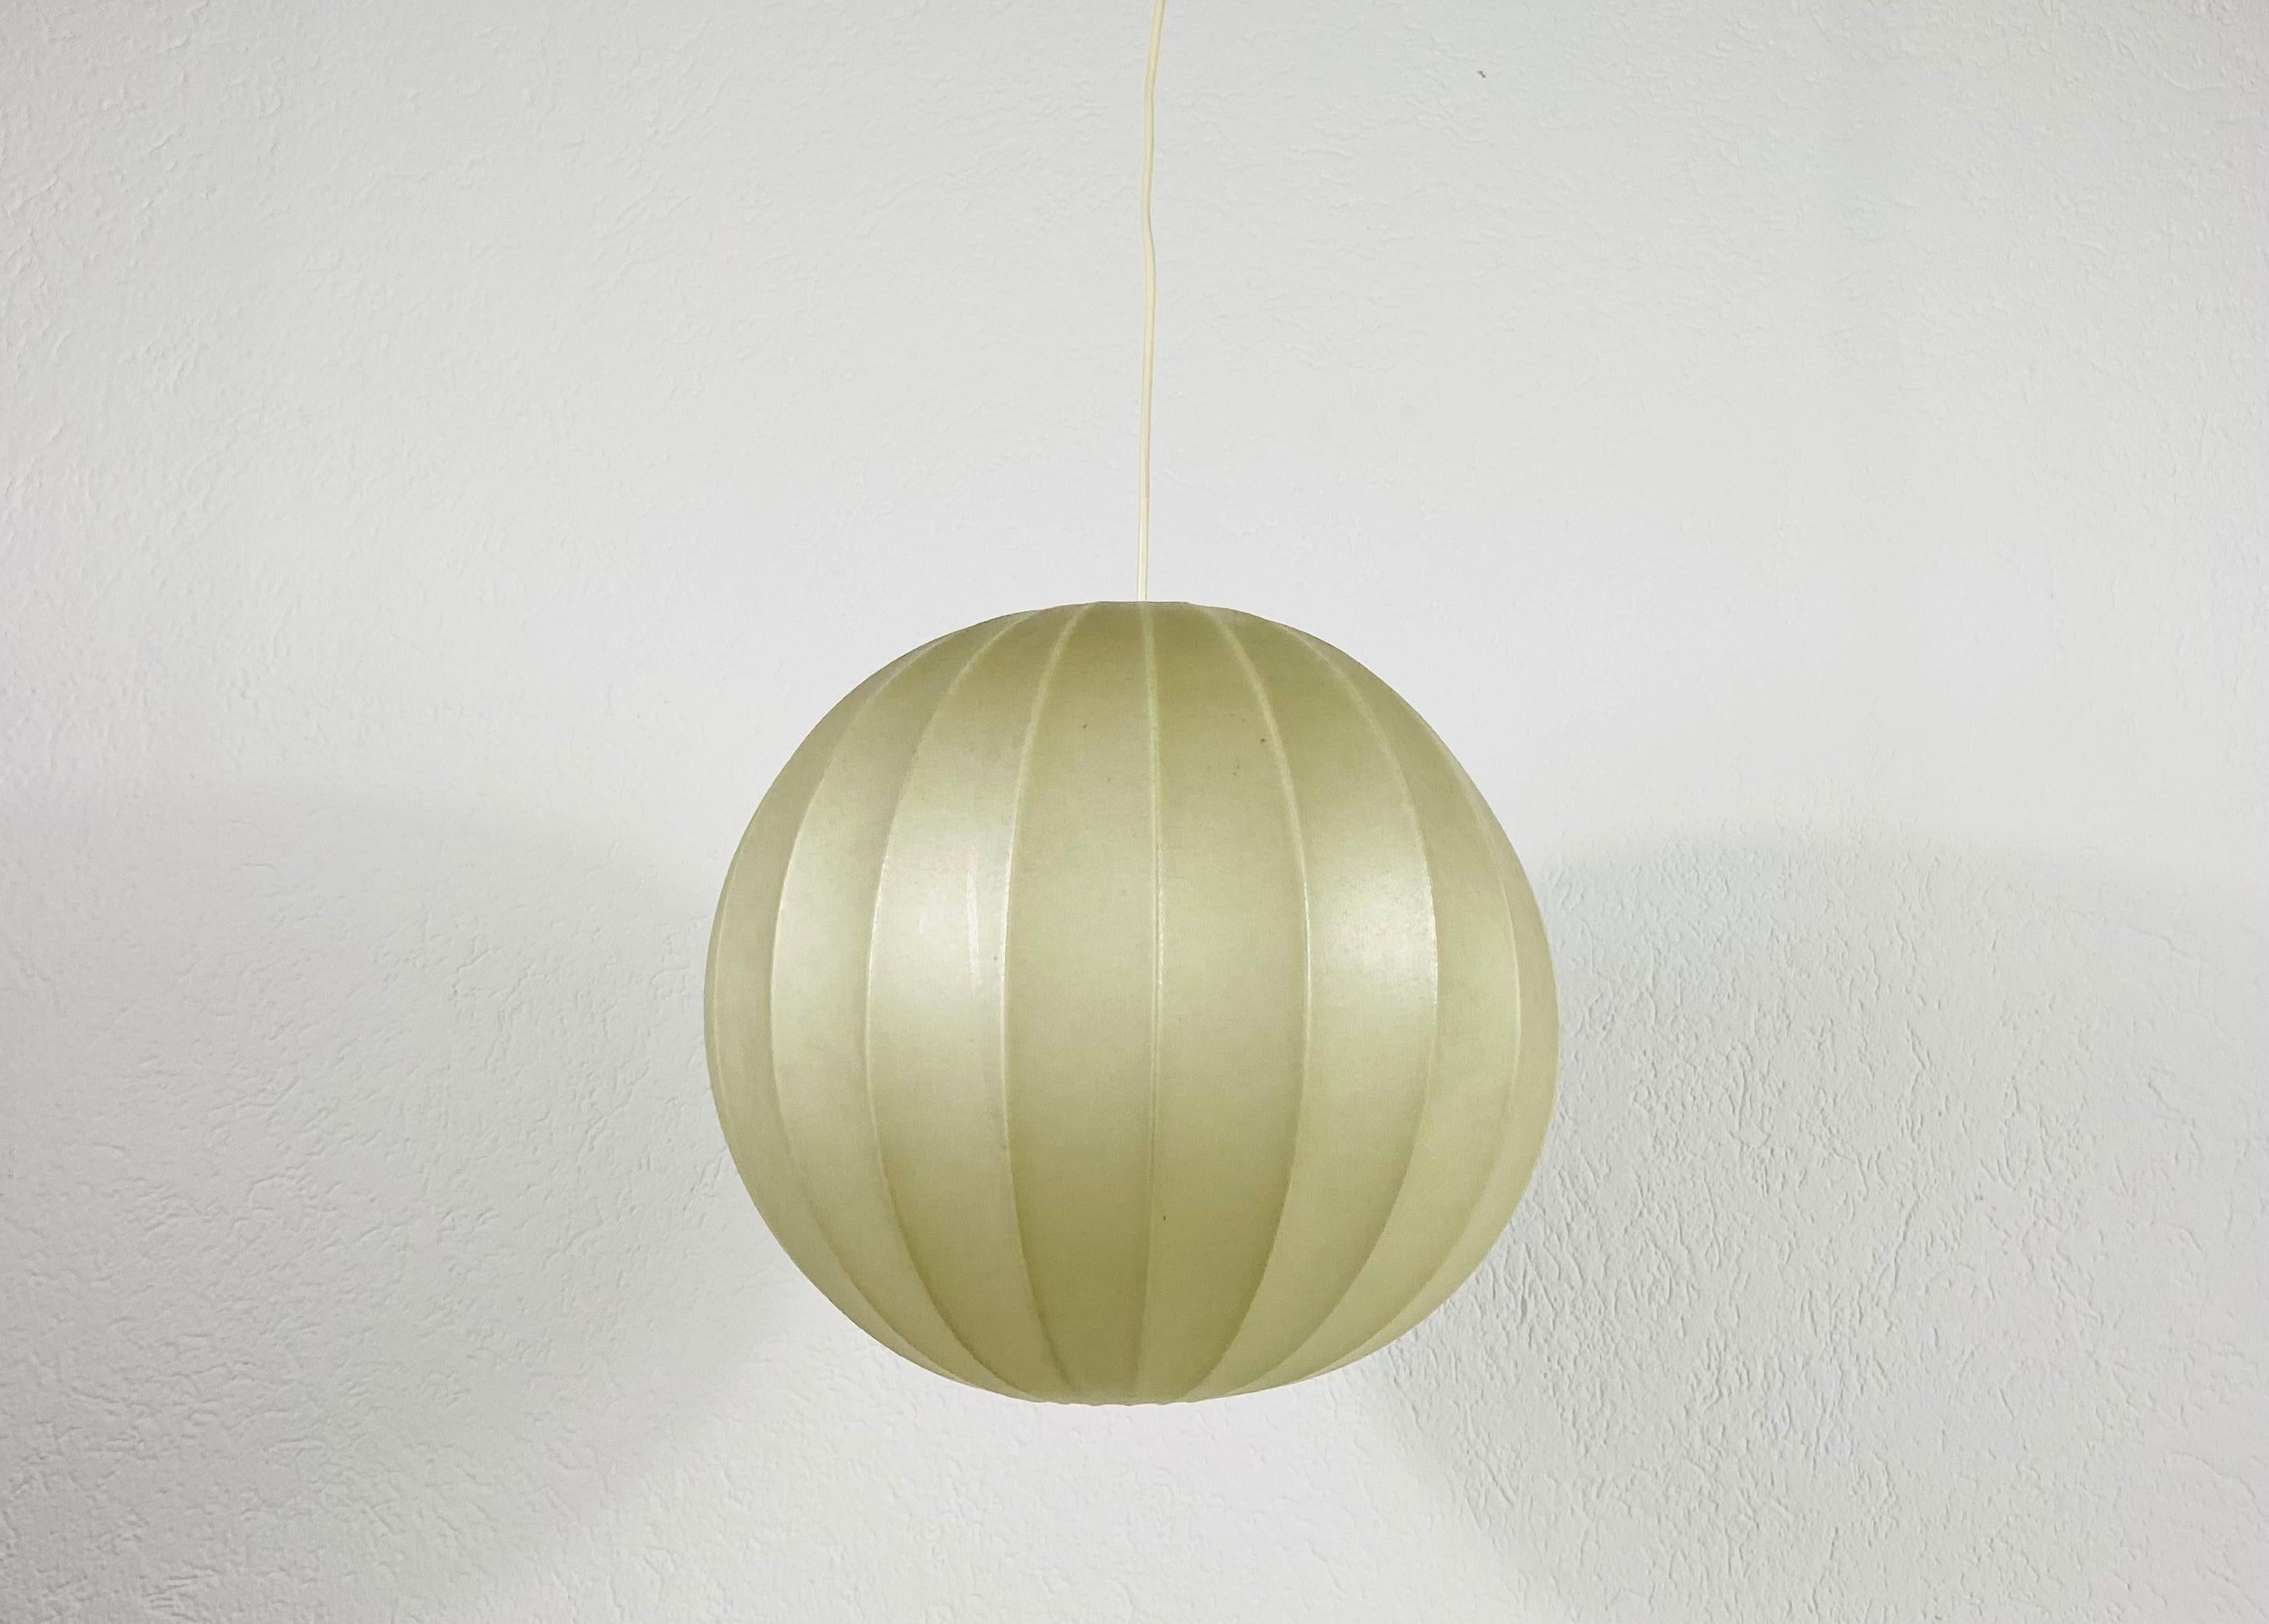 A cocoon hanging lamp made in Italy in the 1960s. It has a beautiful round design, which is similar to the lamps made by Castiglioni. 

Measures: Max height 101 cm

Height of shade 37 cm

Diameter 39 cm


The light requires one E27 light